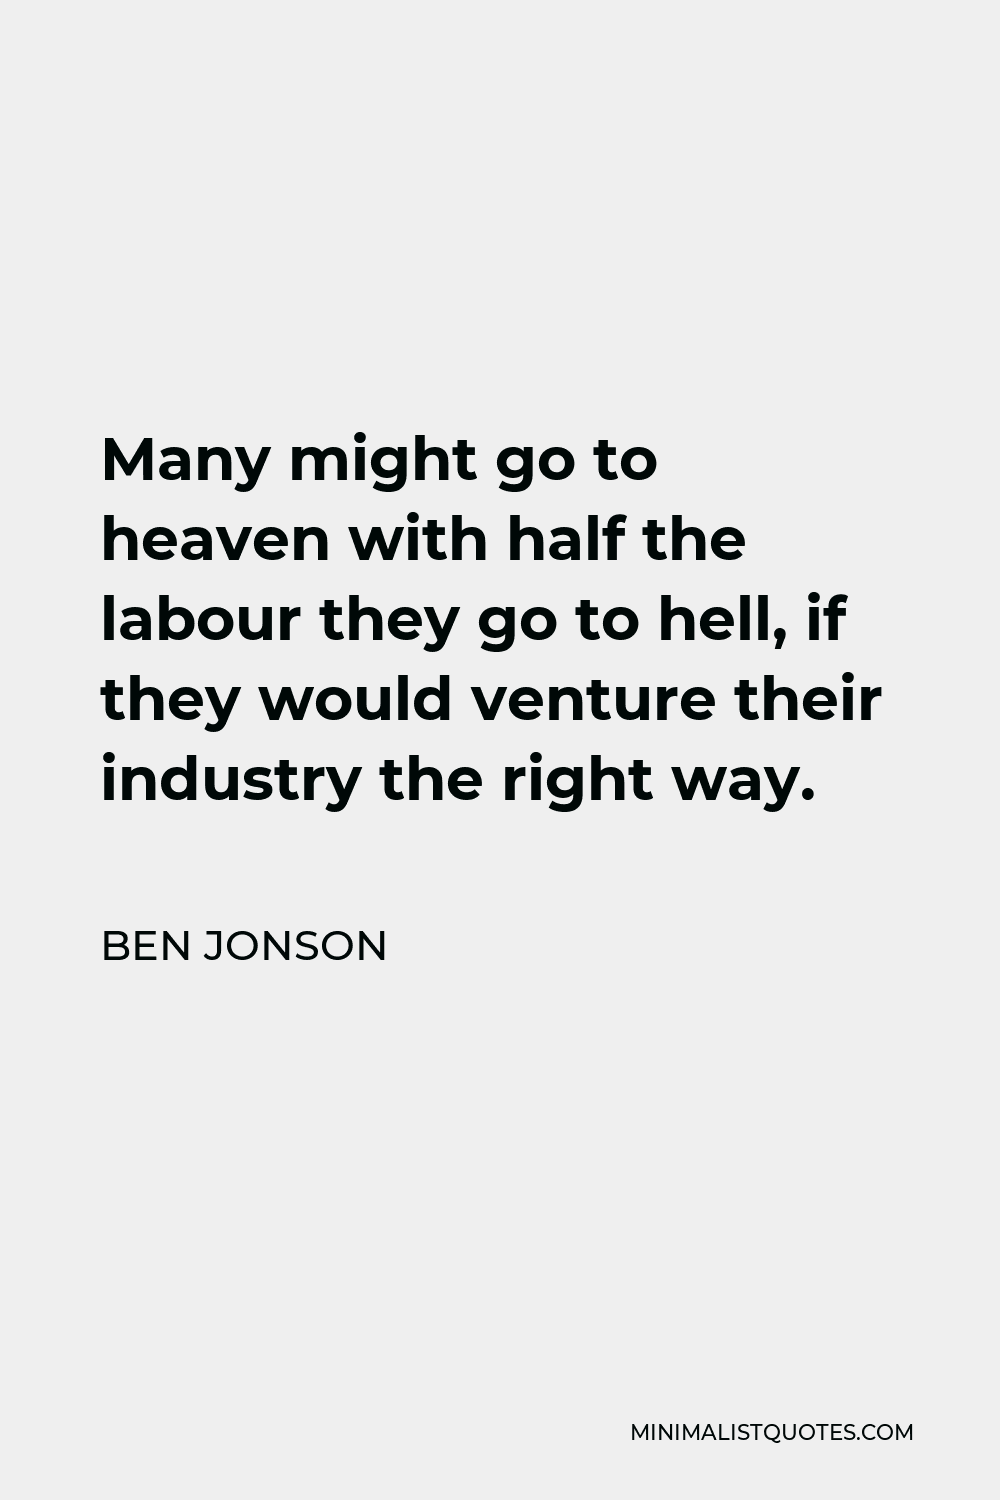 Ben Jonson Quote - Many might go to heaven with half the labour they go to hell, if they would venture their industry the right way.